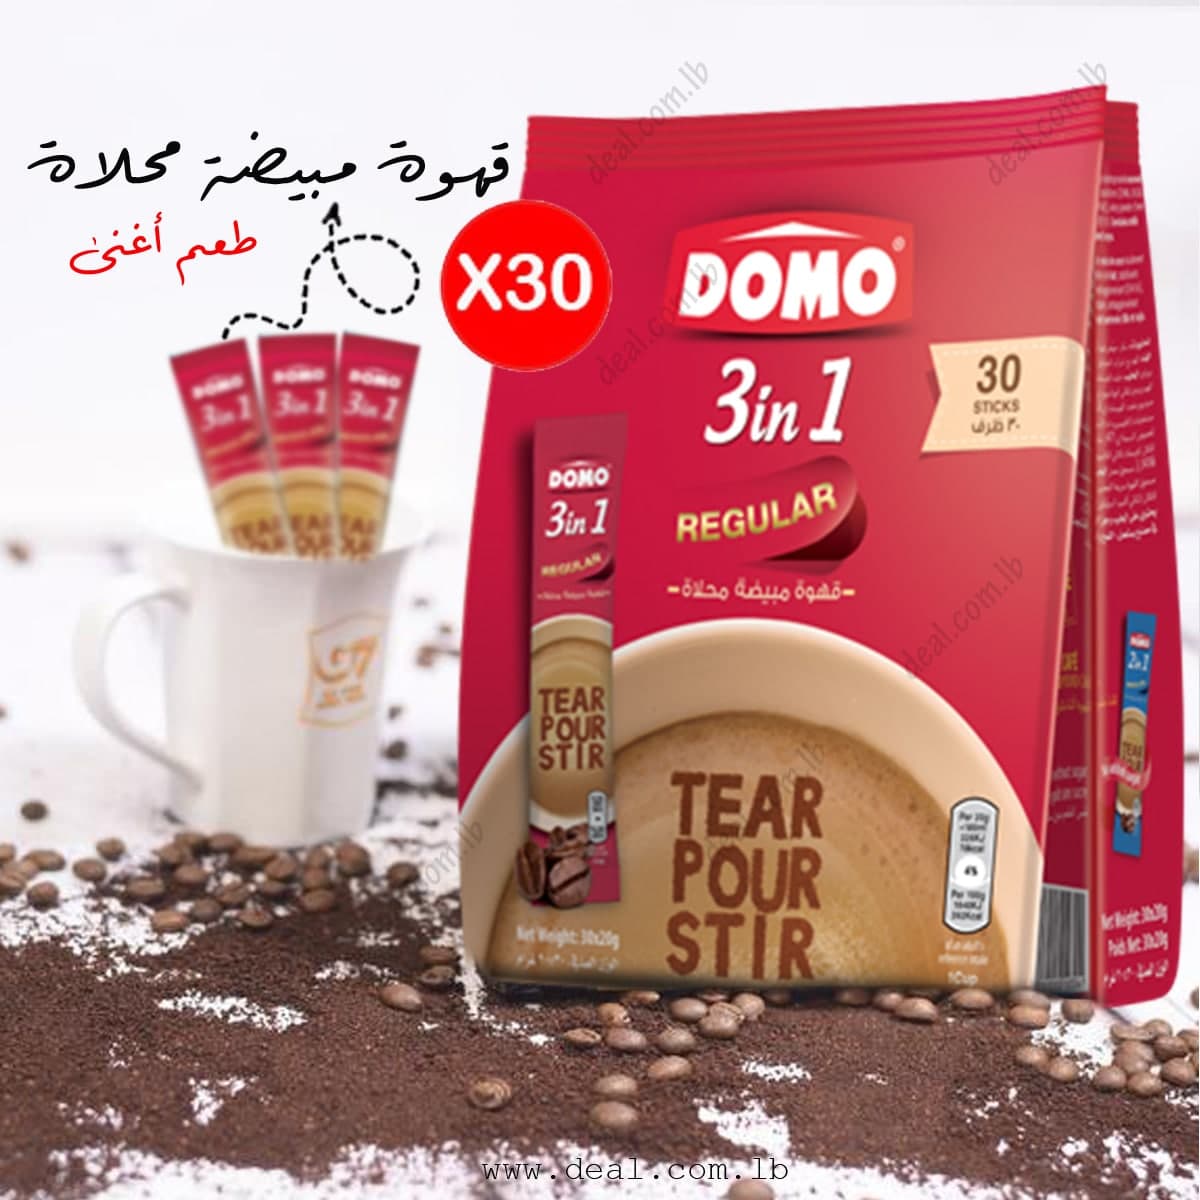 DOMO INSTANT COFFEE 3 IN 1 30pcs 18G